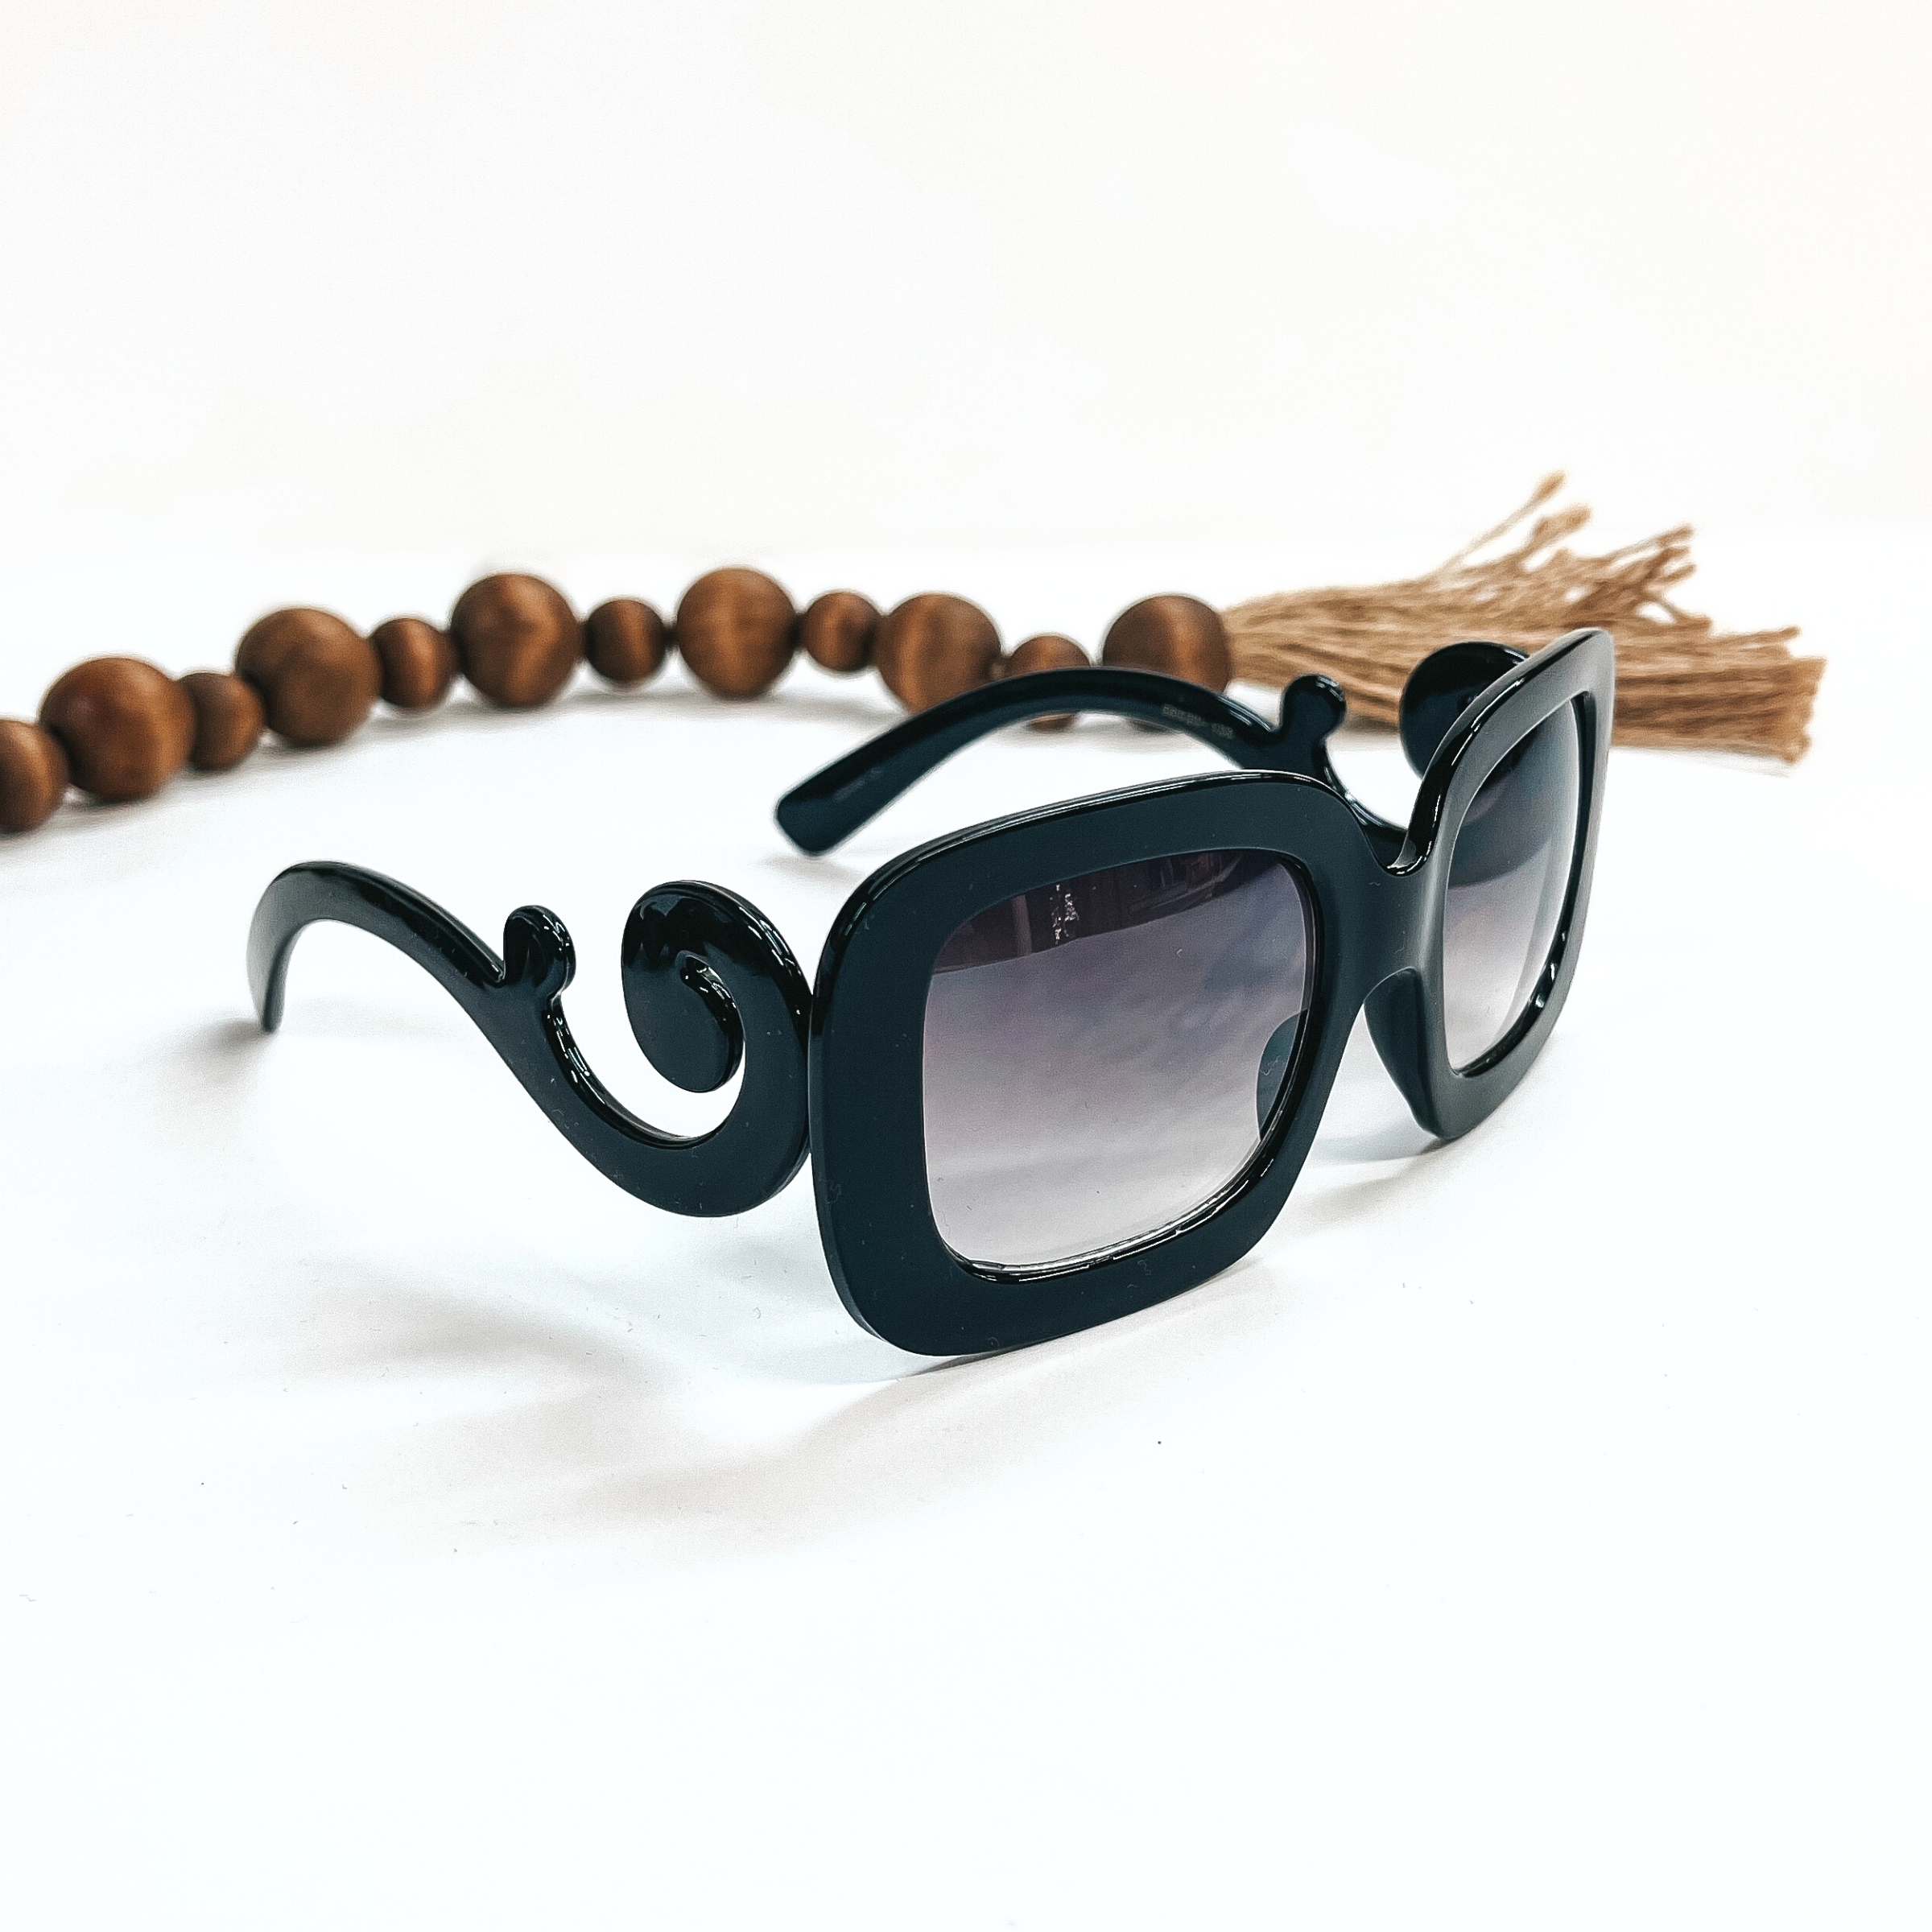 This is a pair of black frame sunglasses, square rounded shape with a dark grey/black  lense. The sides of the sunglasses have a large swirls. These sunglasses are taken  on a white background with dark brown beads and brown tassel in the back as decor.